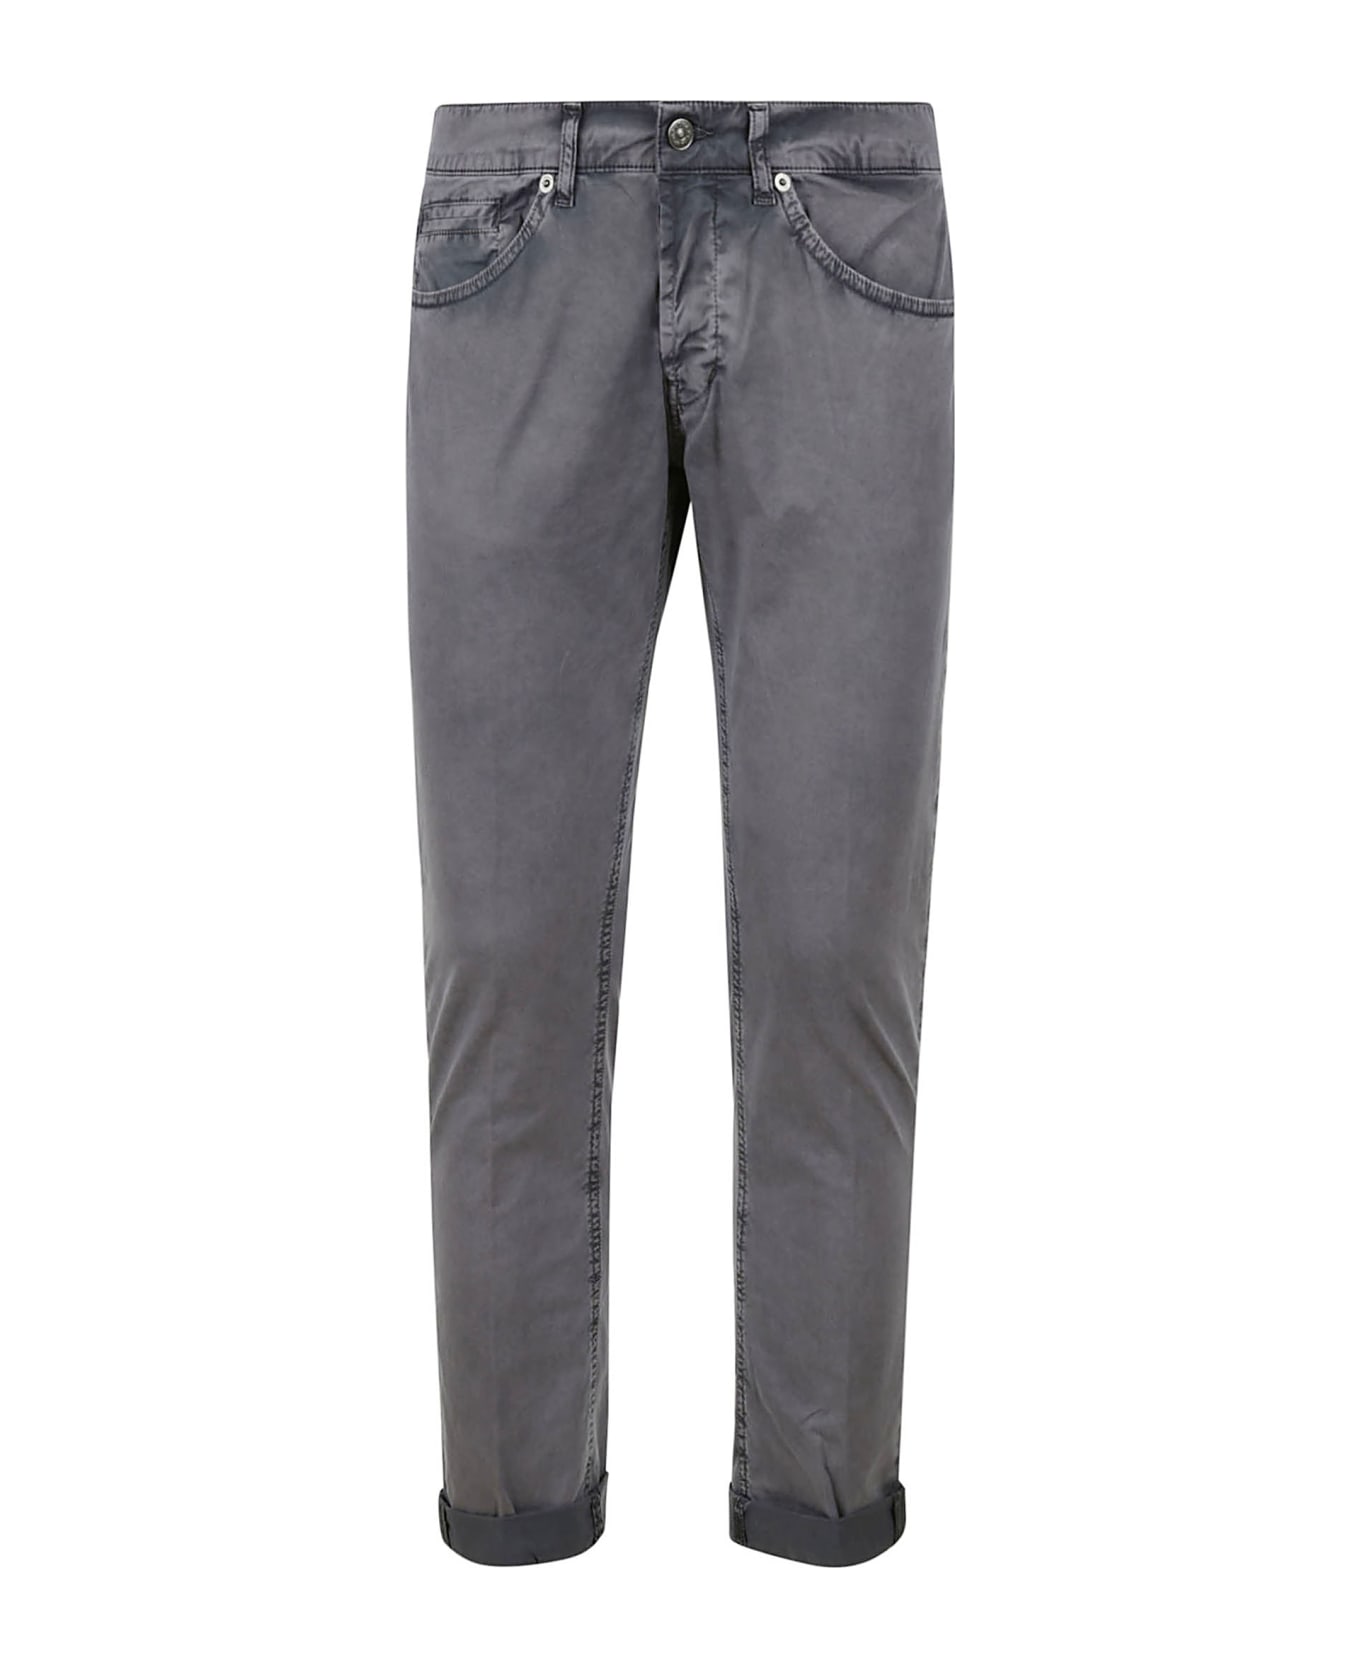 Dondup George Trousers